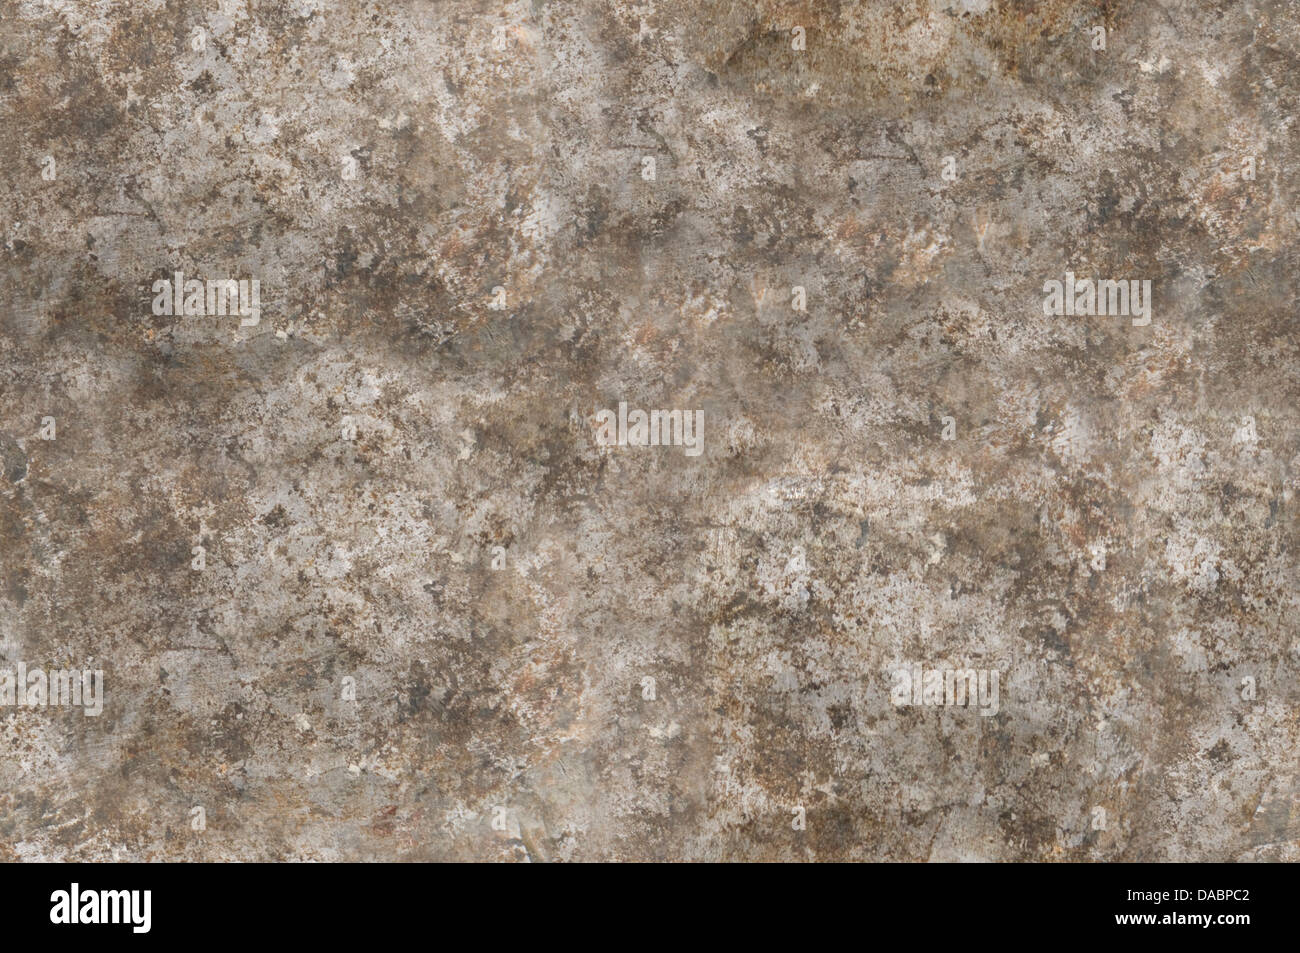 Distressed gray metal surface texture seamlessly tileable Stock Photo